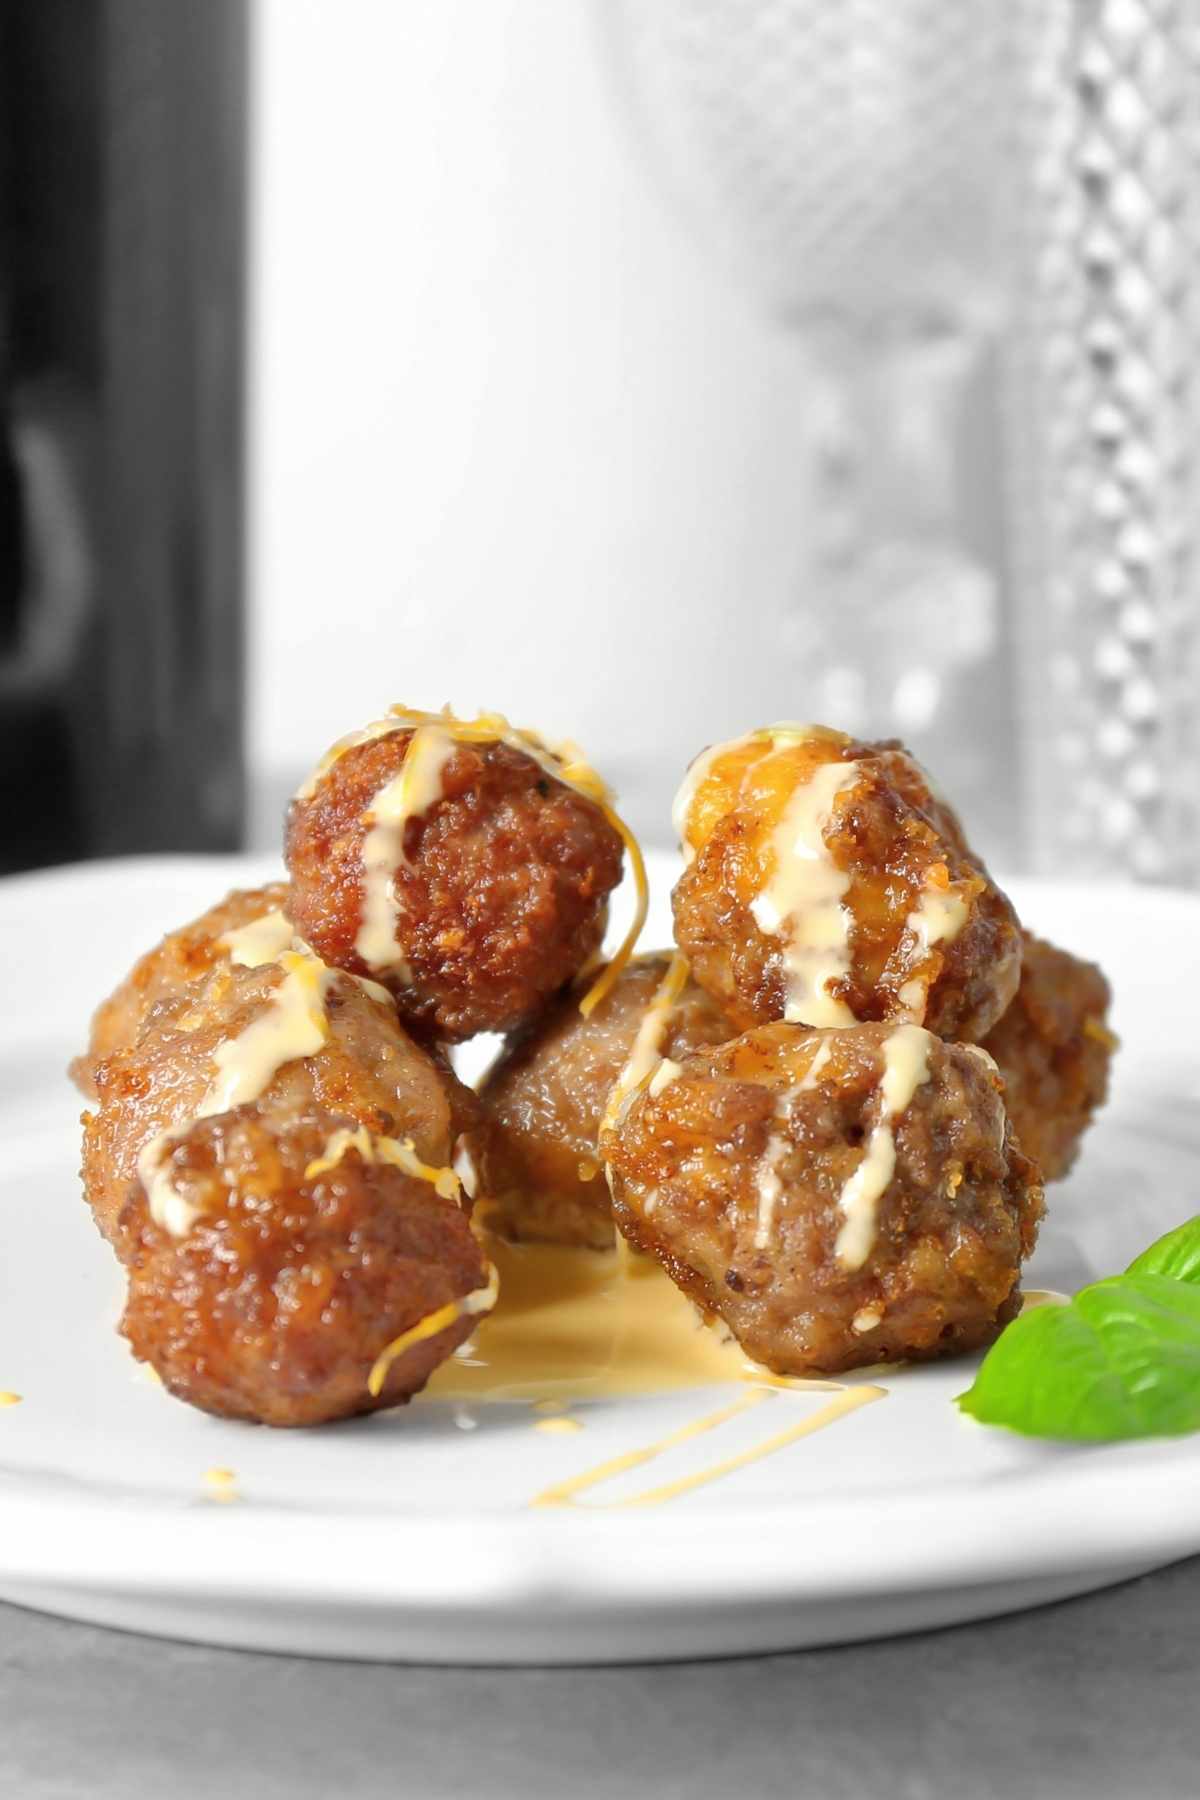 These savory Sausage Balls come together with just 5 ingredients. They have a delicious cheesy flavor that pairs well with the pork sausage.